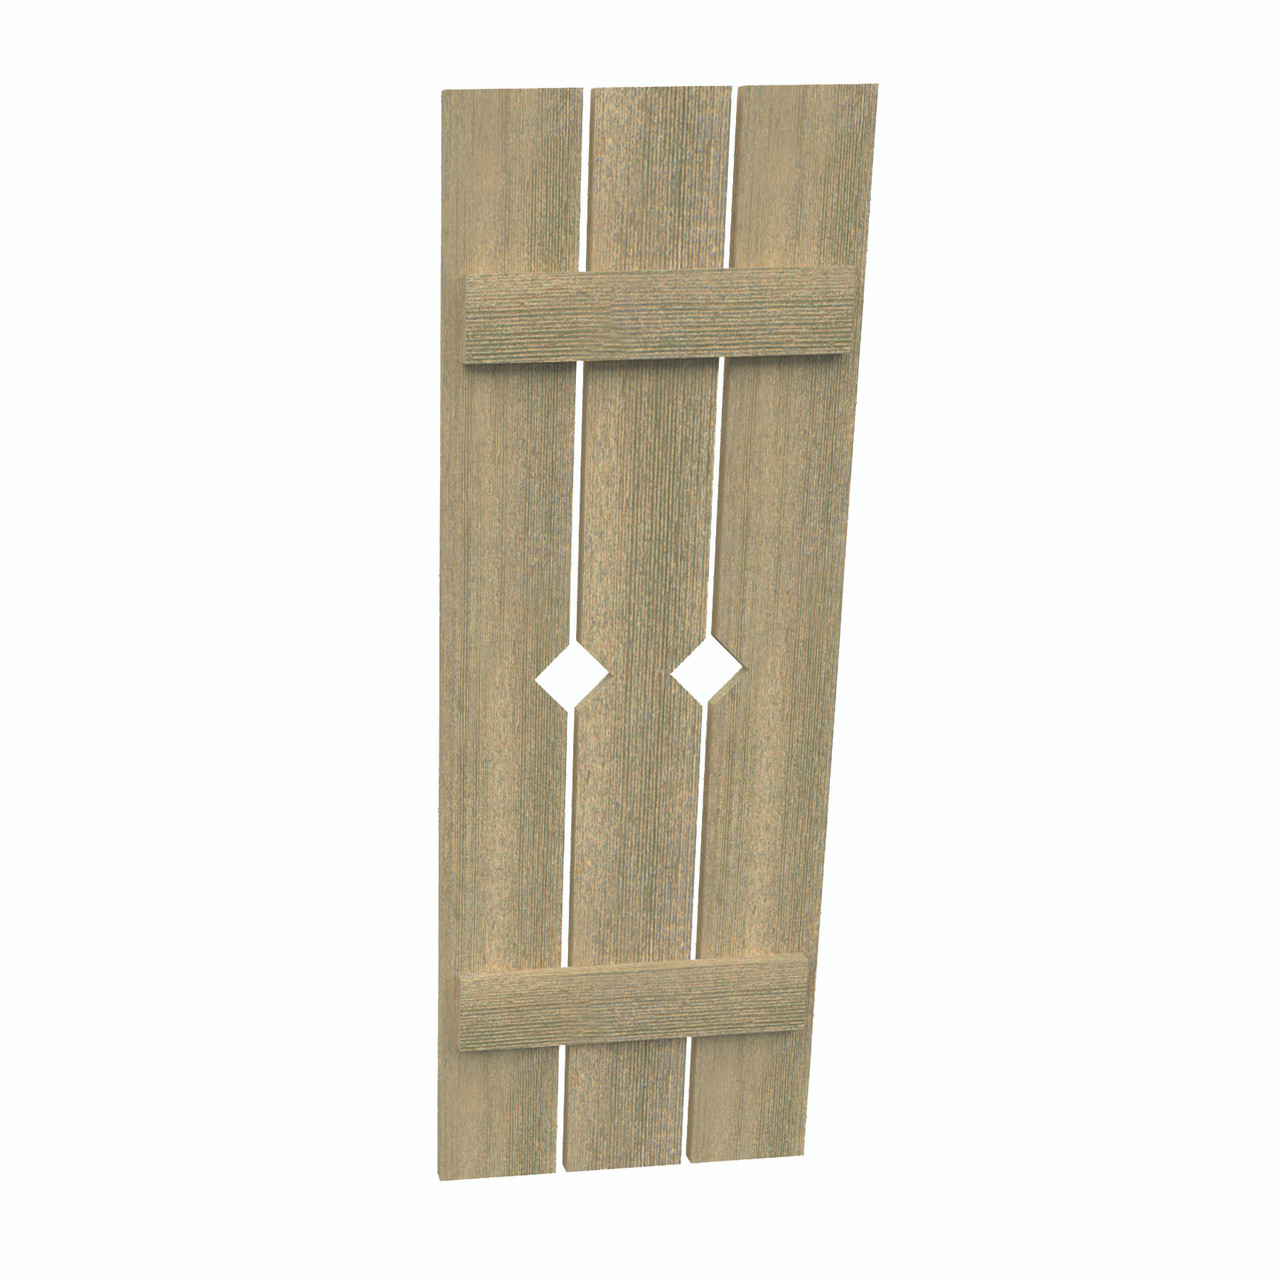 18 inch by 40 inch Plank Shutter with 3-Plank, Diamond